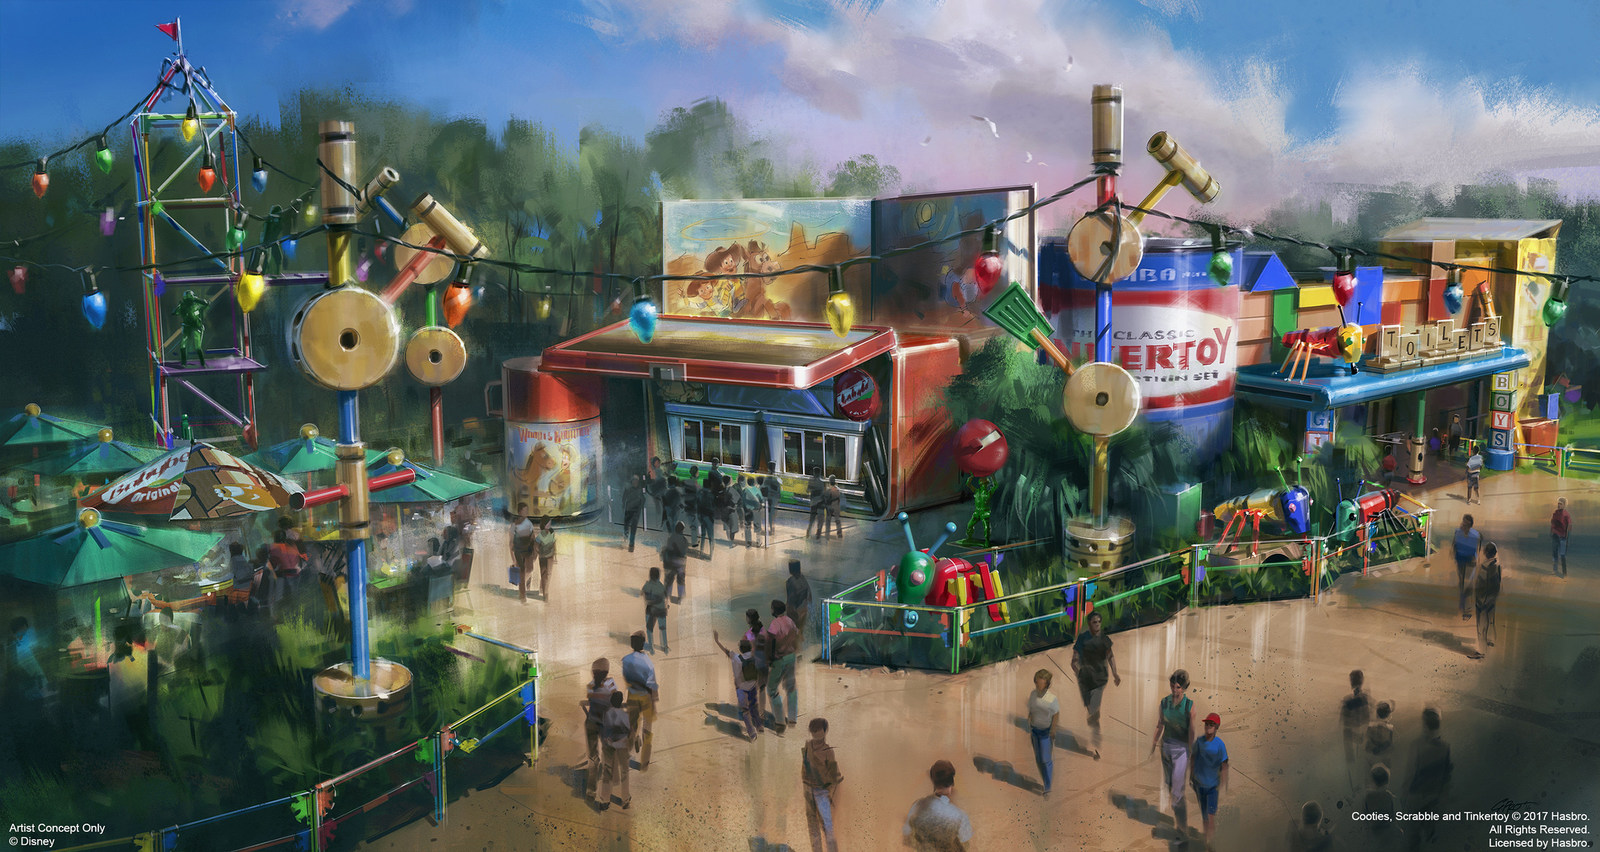 Tasty Meals with a Side of Sentimentality: Woody's Lunch Box Puts a Modern Spin on Timeless Menu Favorites for Guests of Toy Story Land